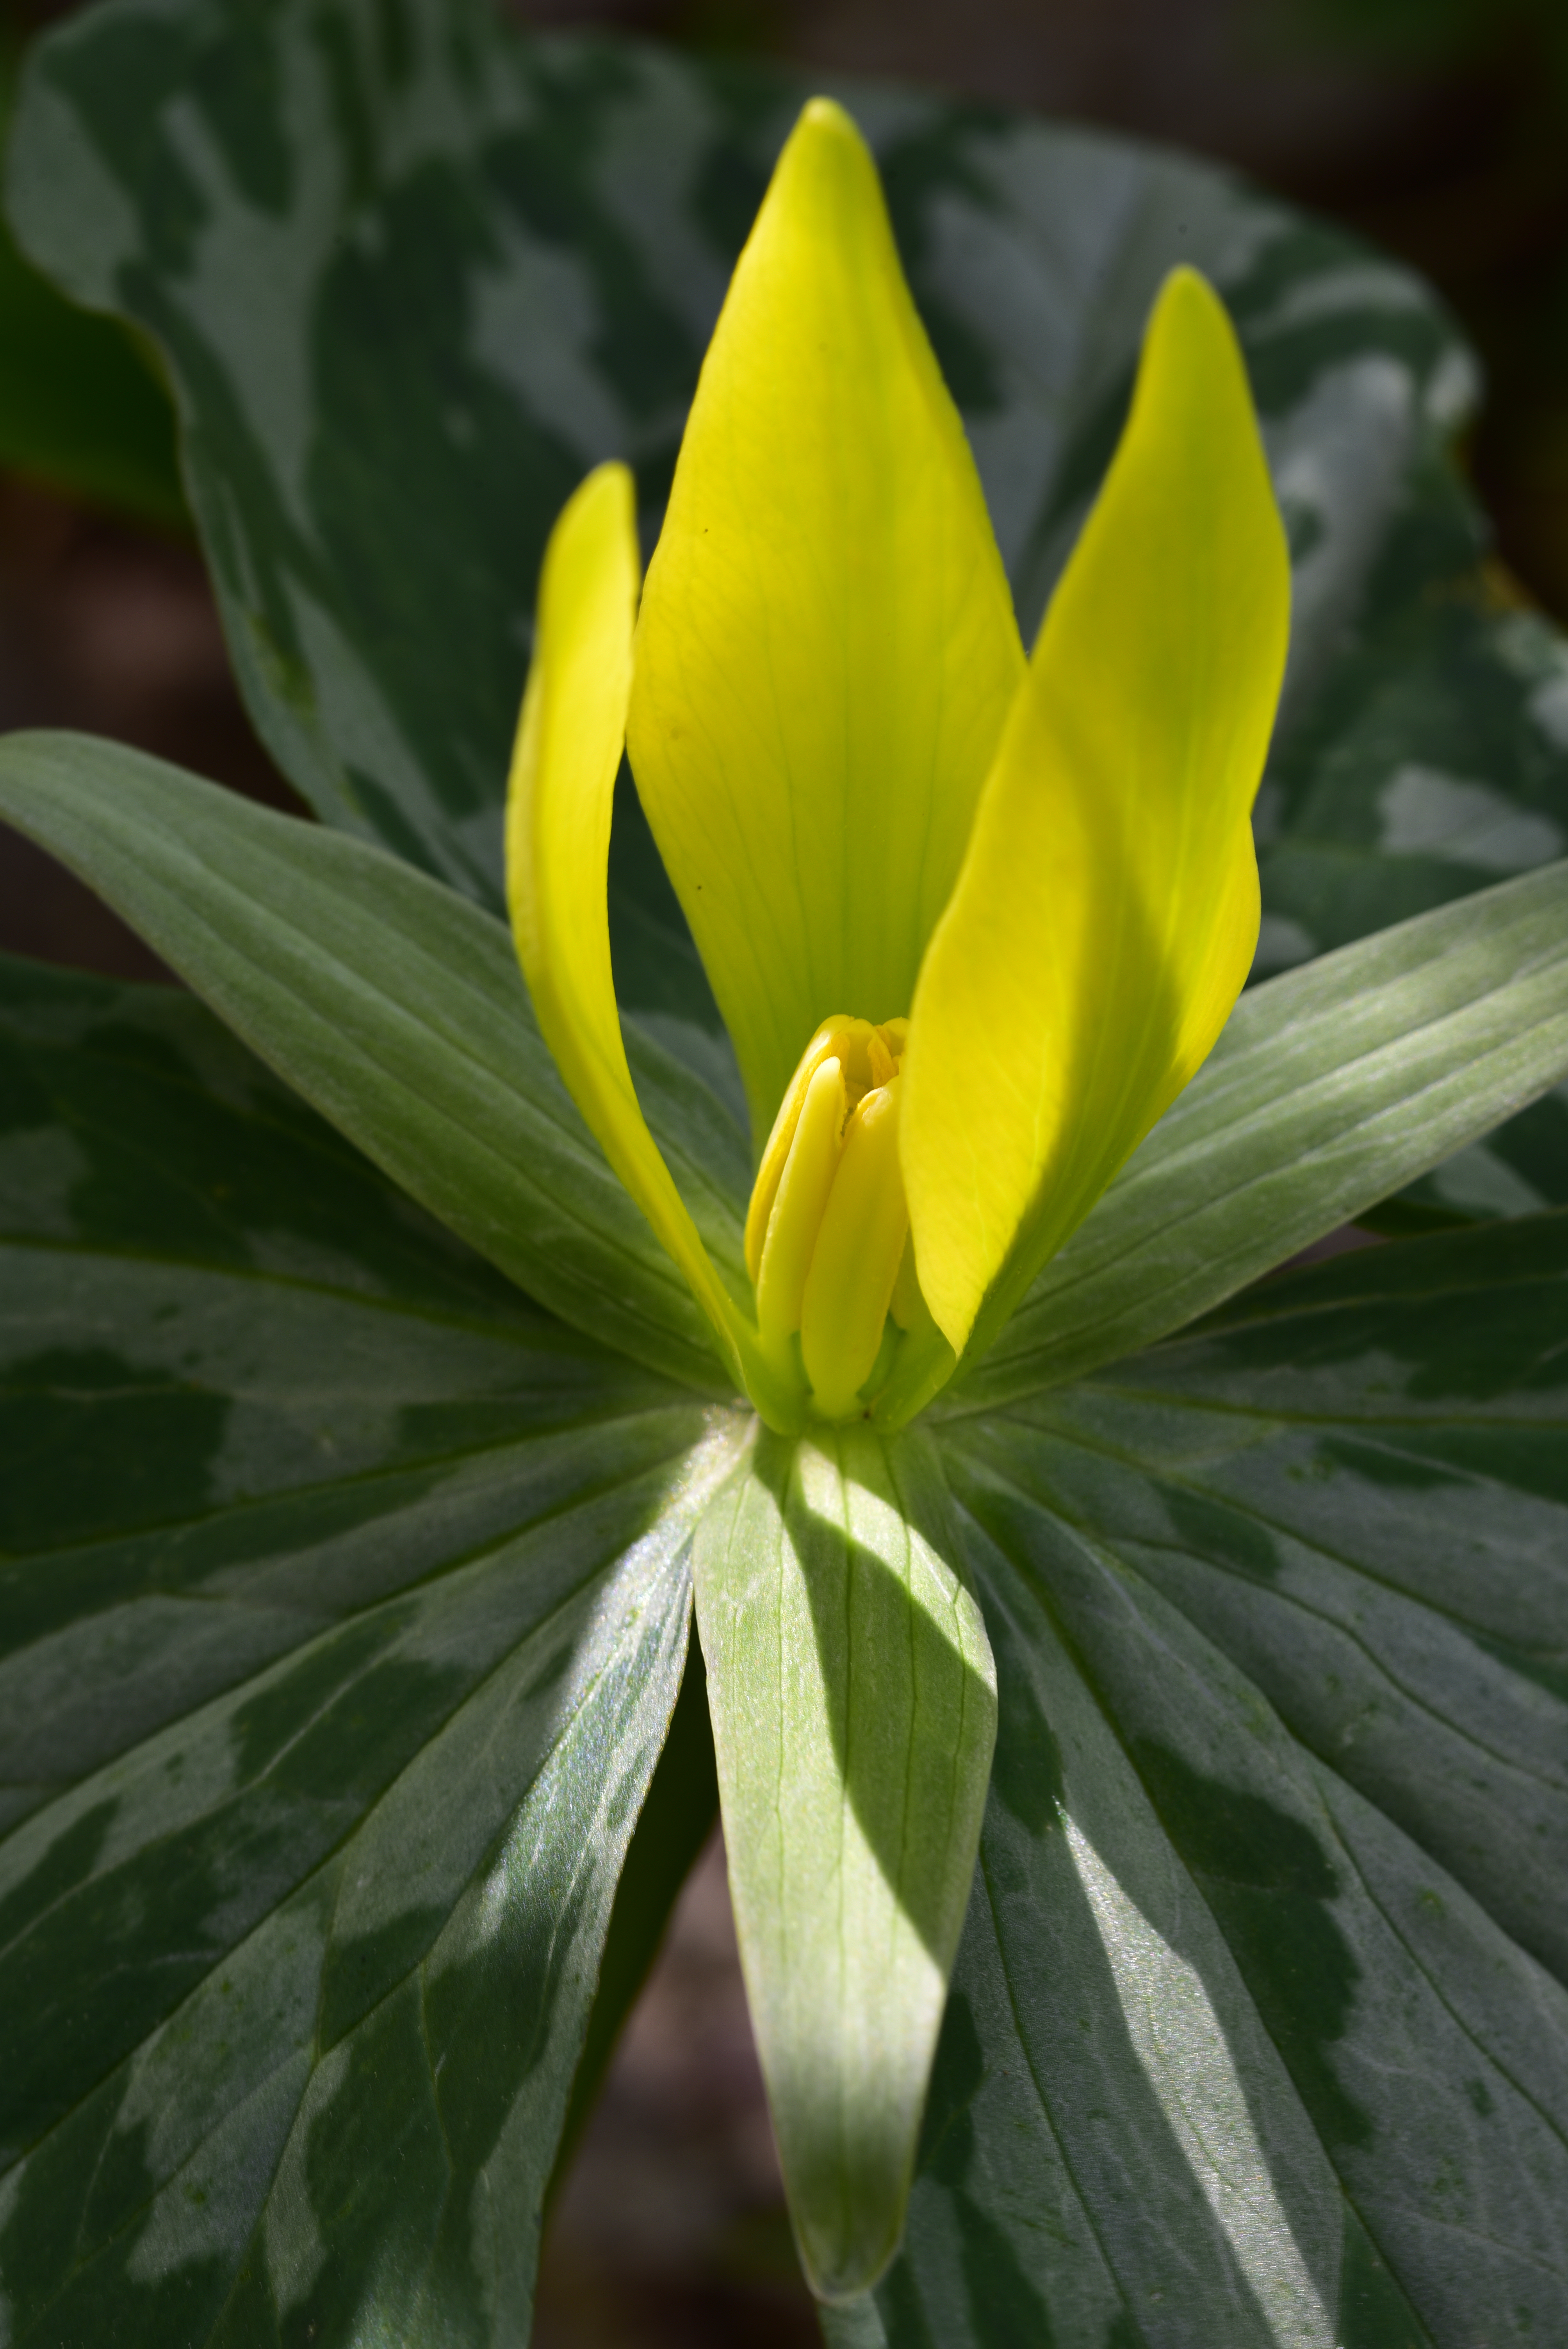 Yellow trillium (Trillium luteum)  -  Cove Hardwoods Nature Trail, Great Smoky Mountains National Park, Tennessee